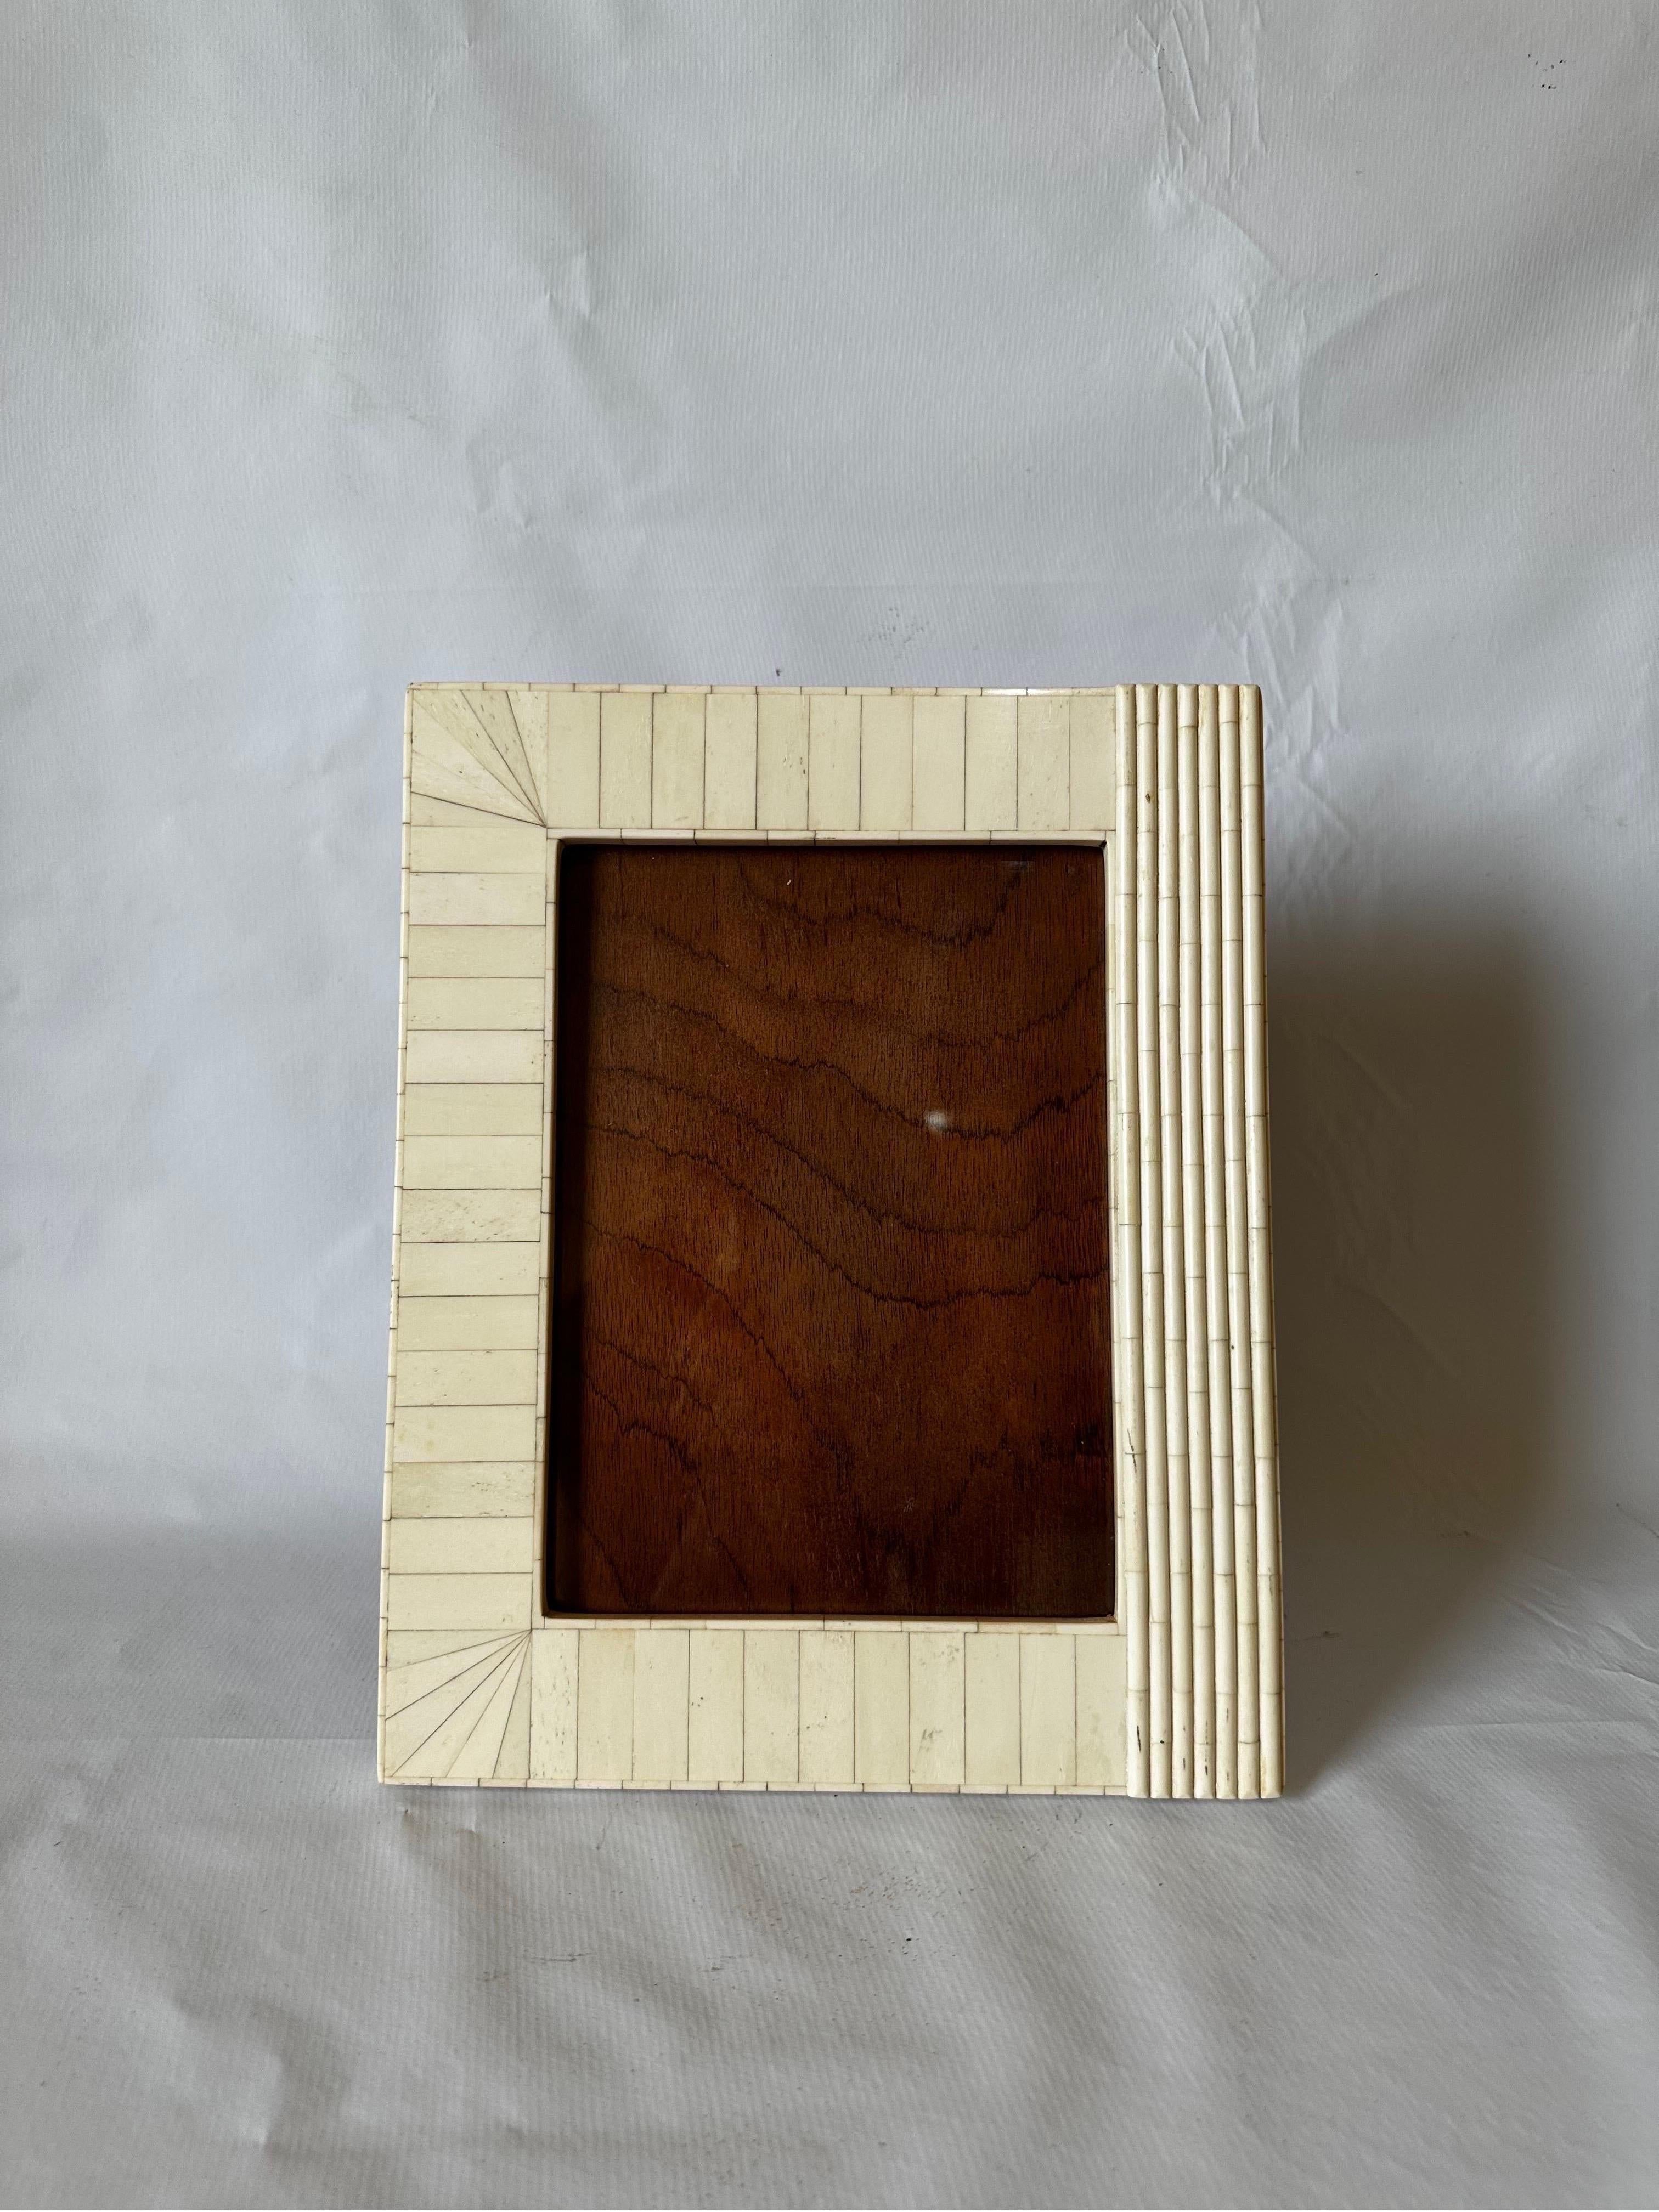 Brazilian modern picture frame in tessellated stone with wood backing circa 1970s.

Viewable photo size: W6-1/2” H8-1/2”